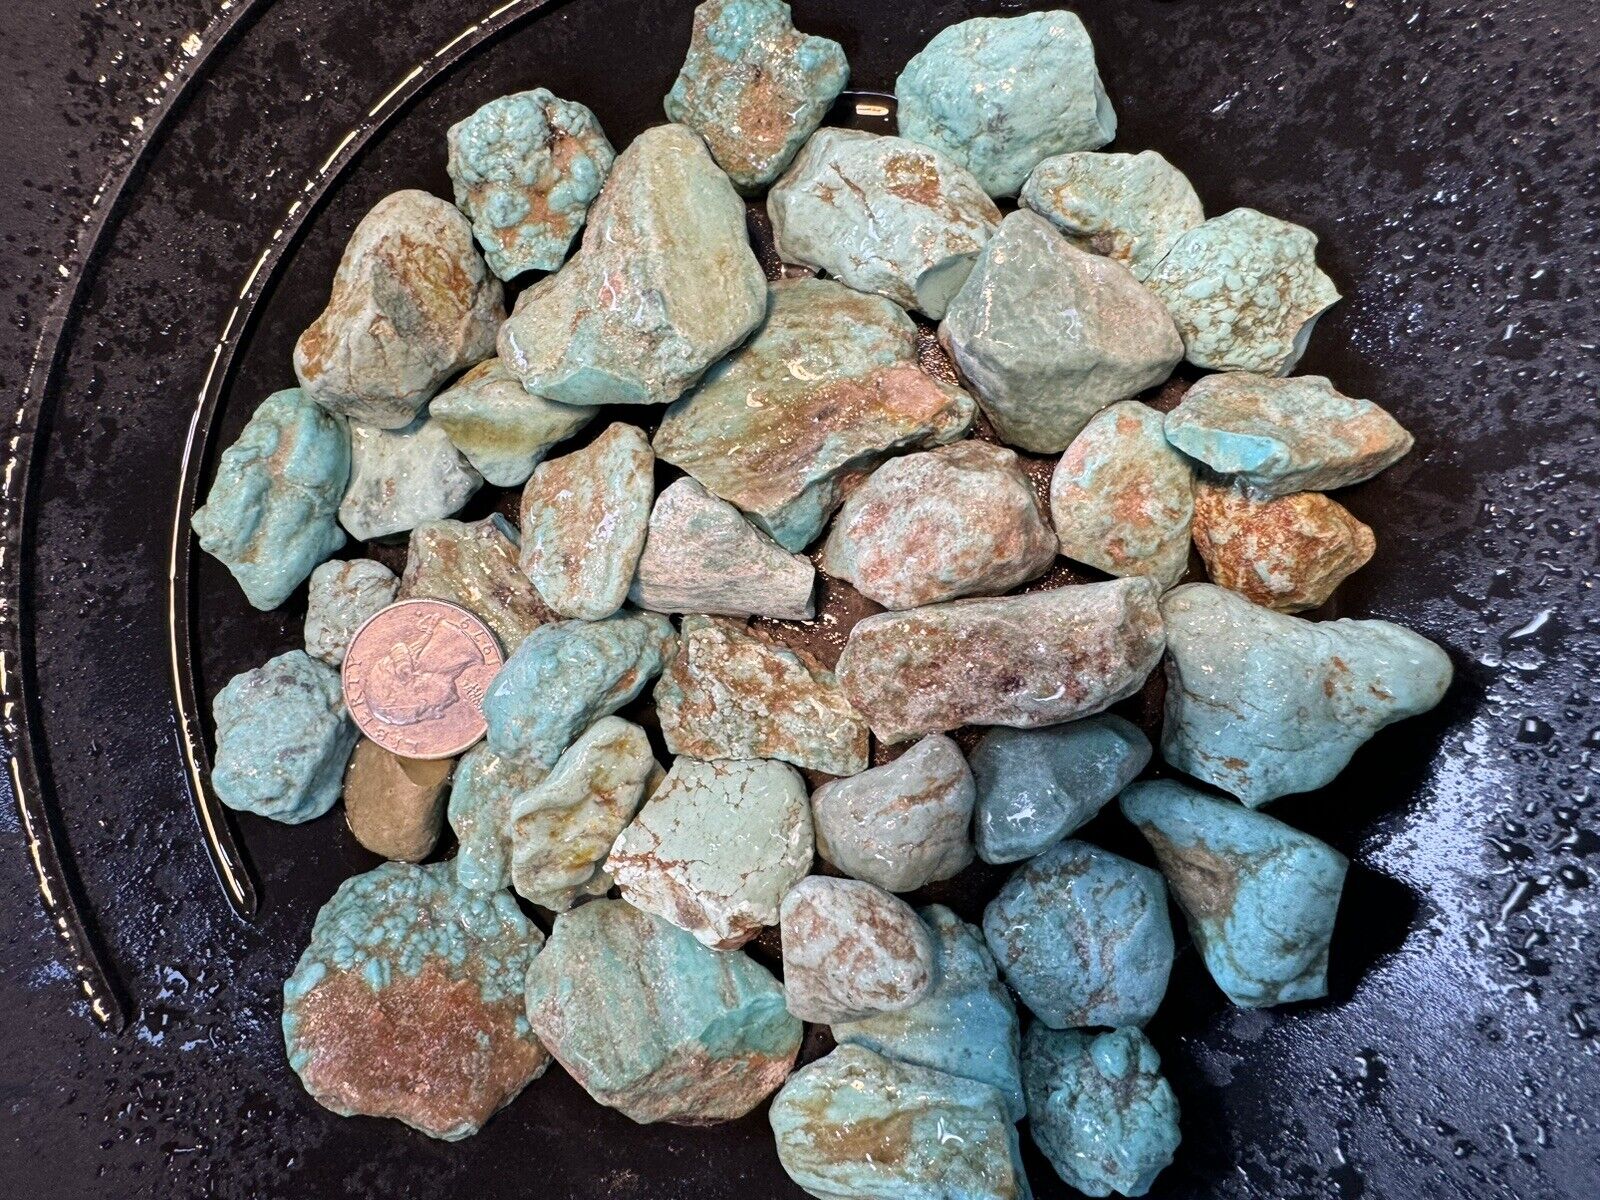 1 pound  Robins Egg Blue Turquoise Nuggets From Tq Mt American Turquoise AZ